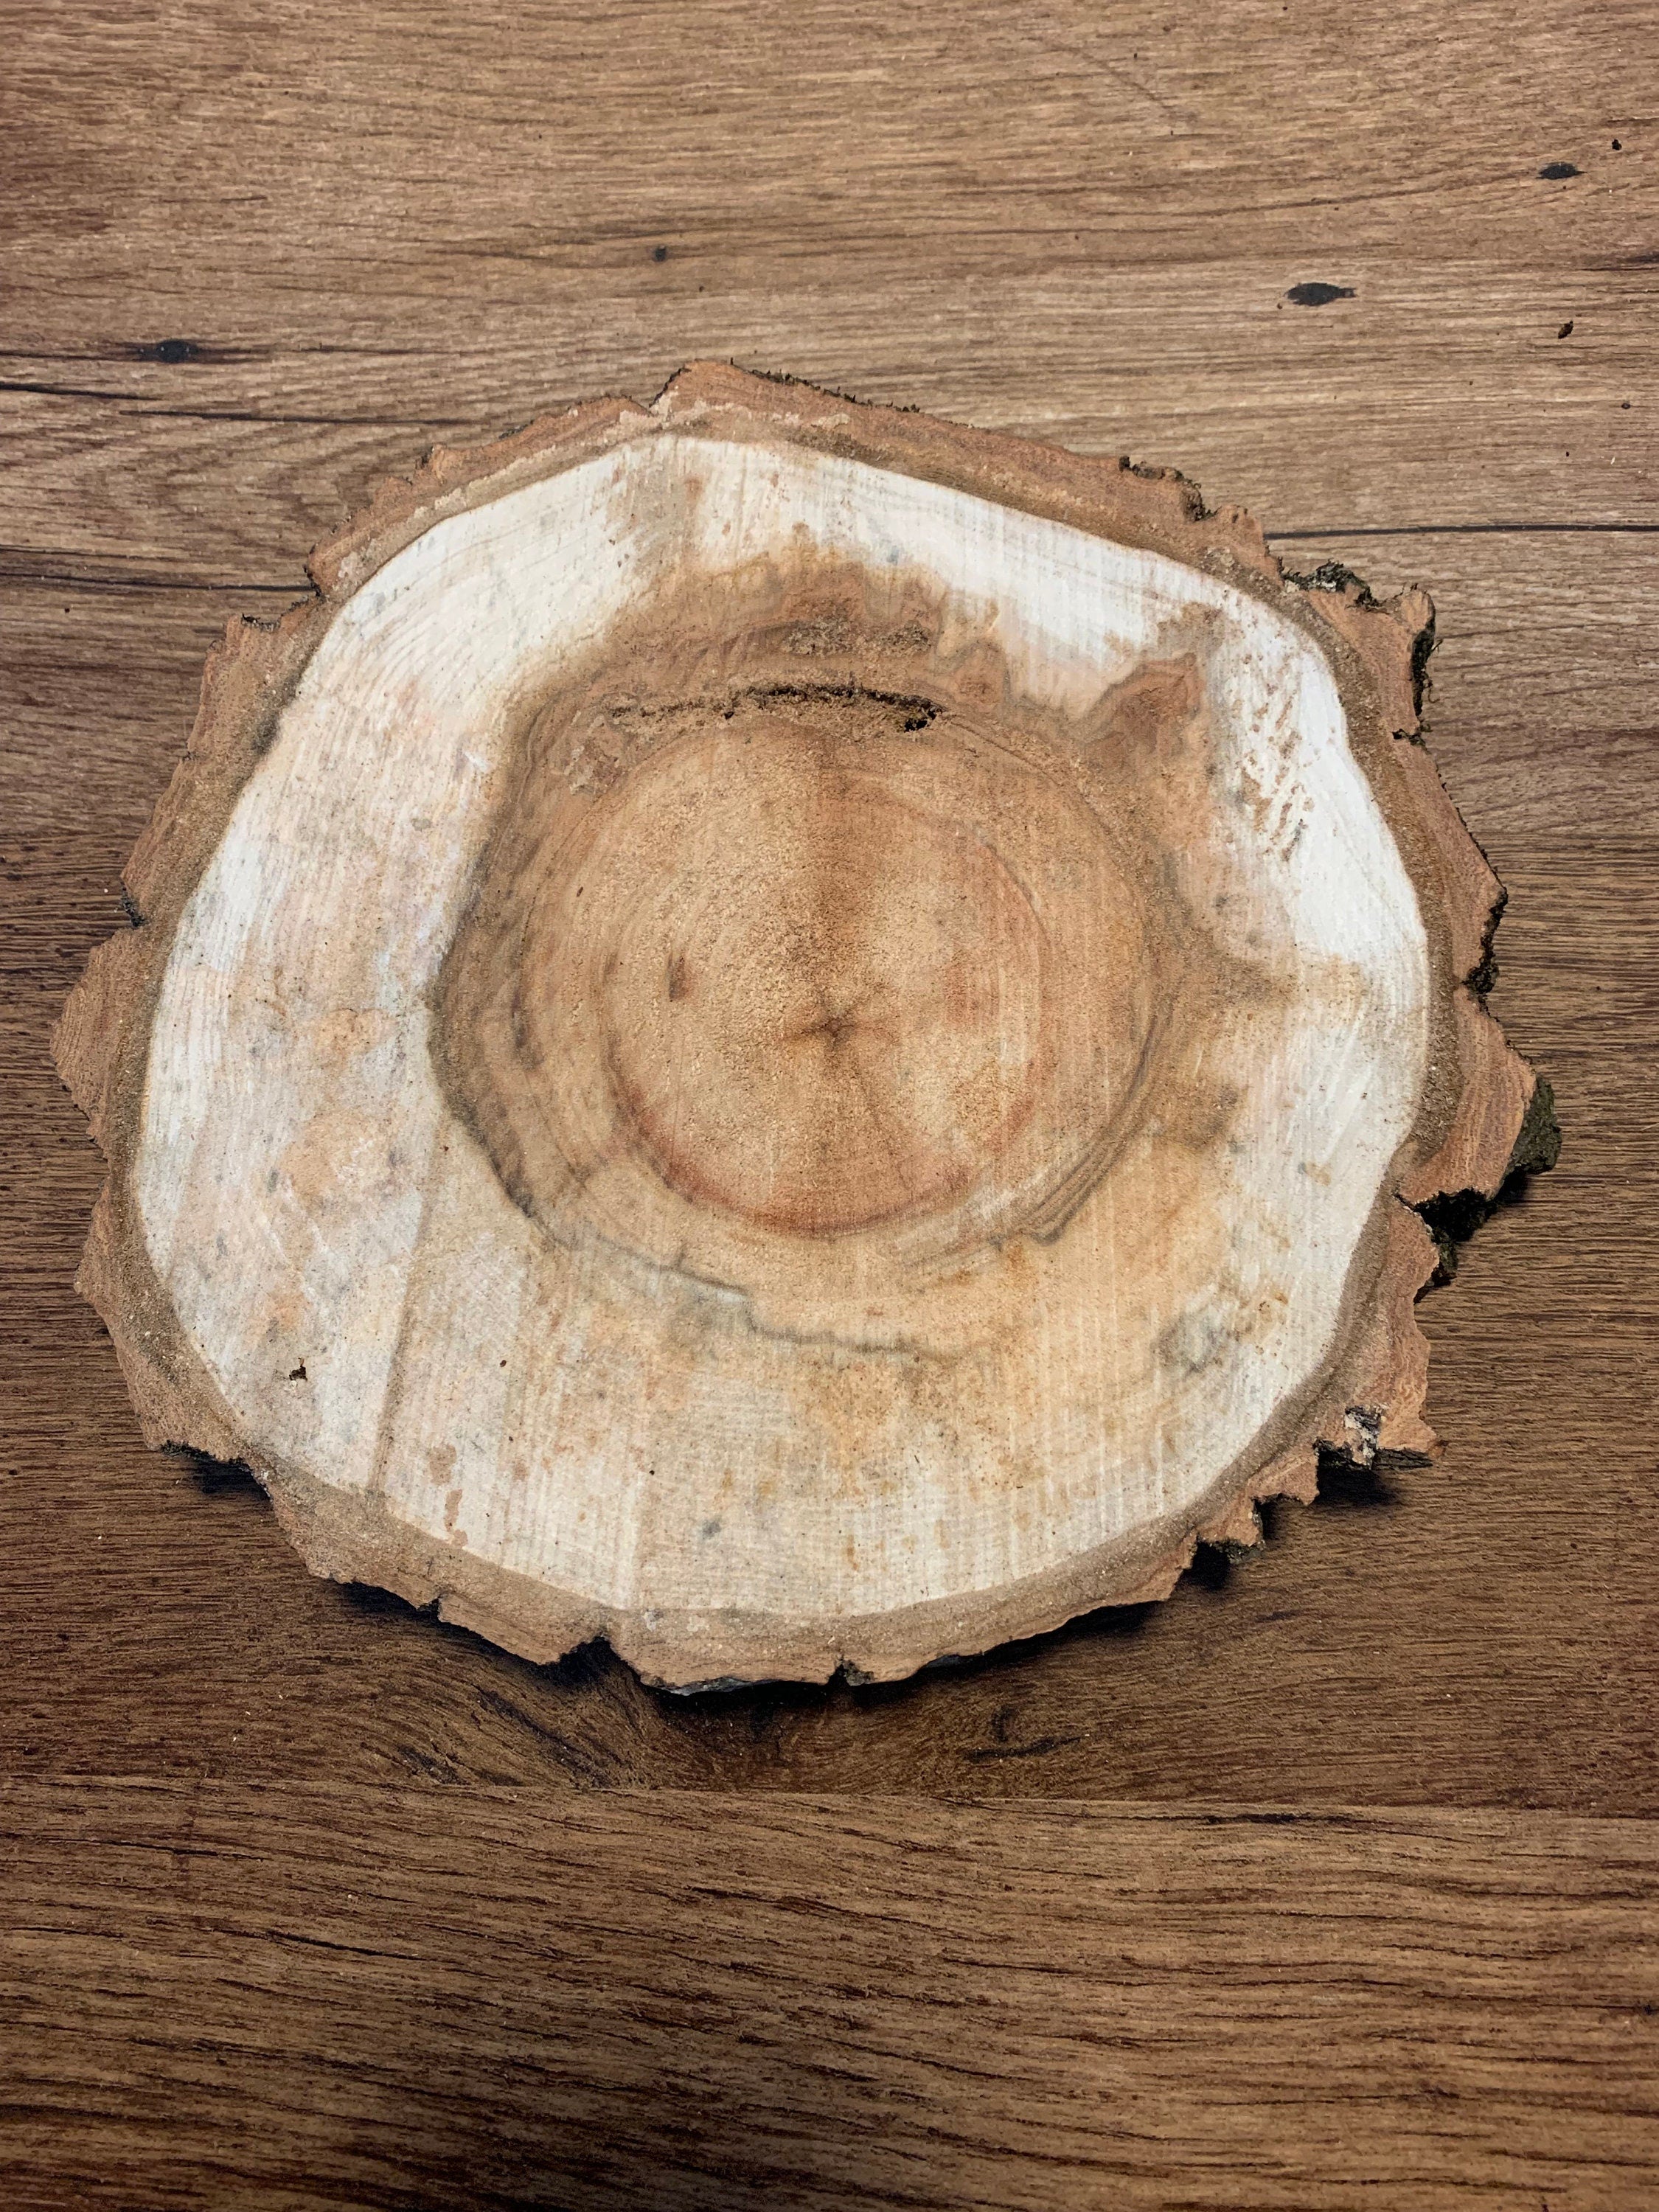 One Large Aspen Slice, Approximately 10 Inches Long by 8 Inches Wide and 1 Inch Thick